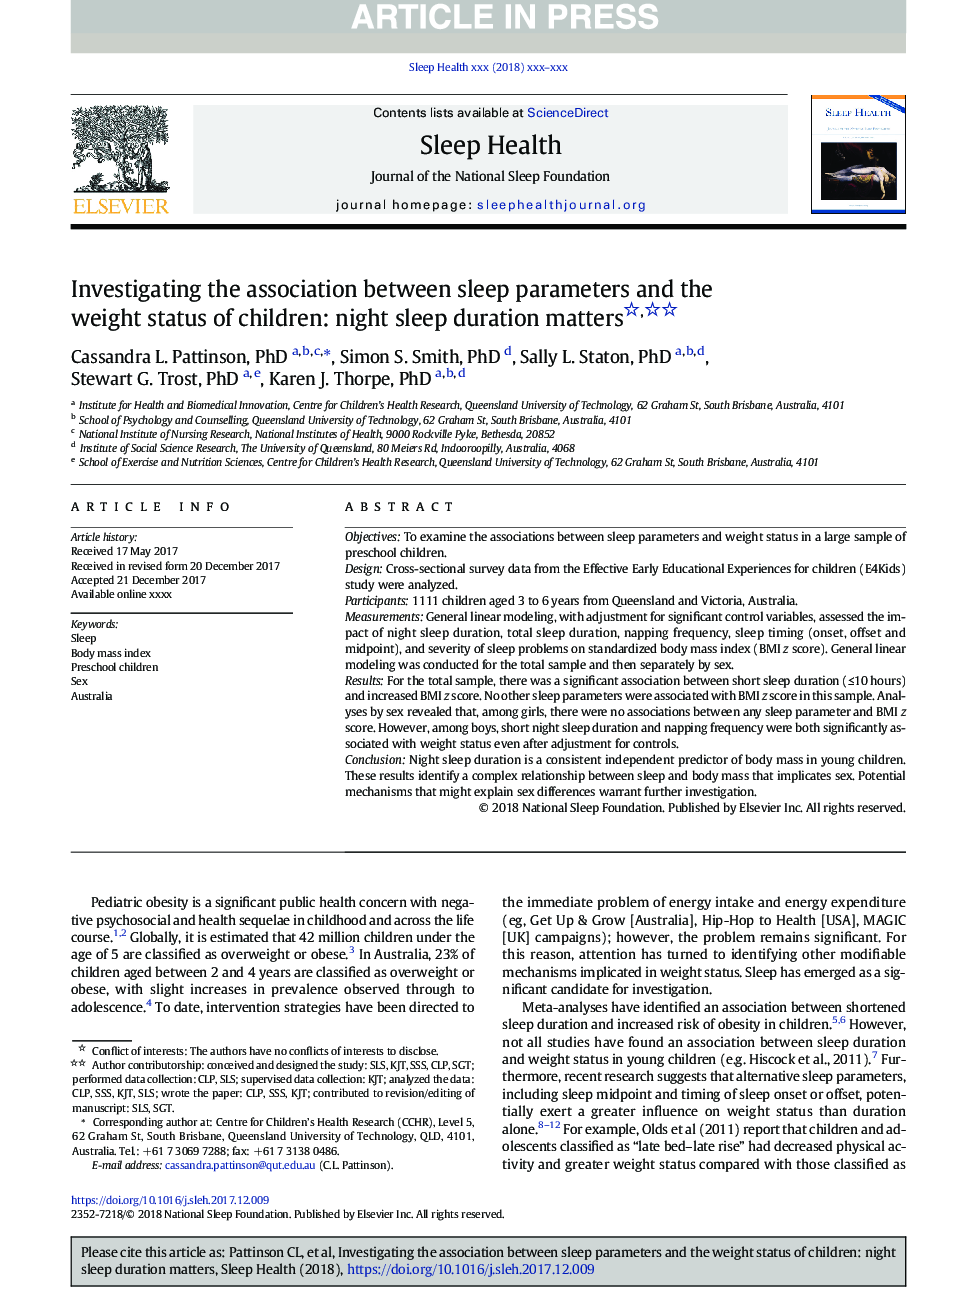 Investigating the association between sleep parameters and the weight status of children: night sleep duration matters